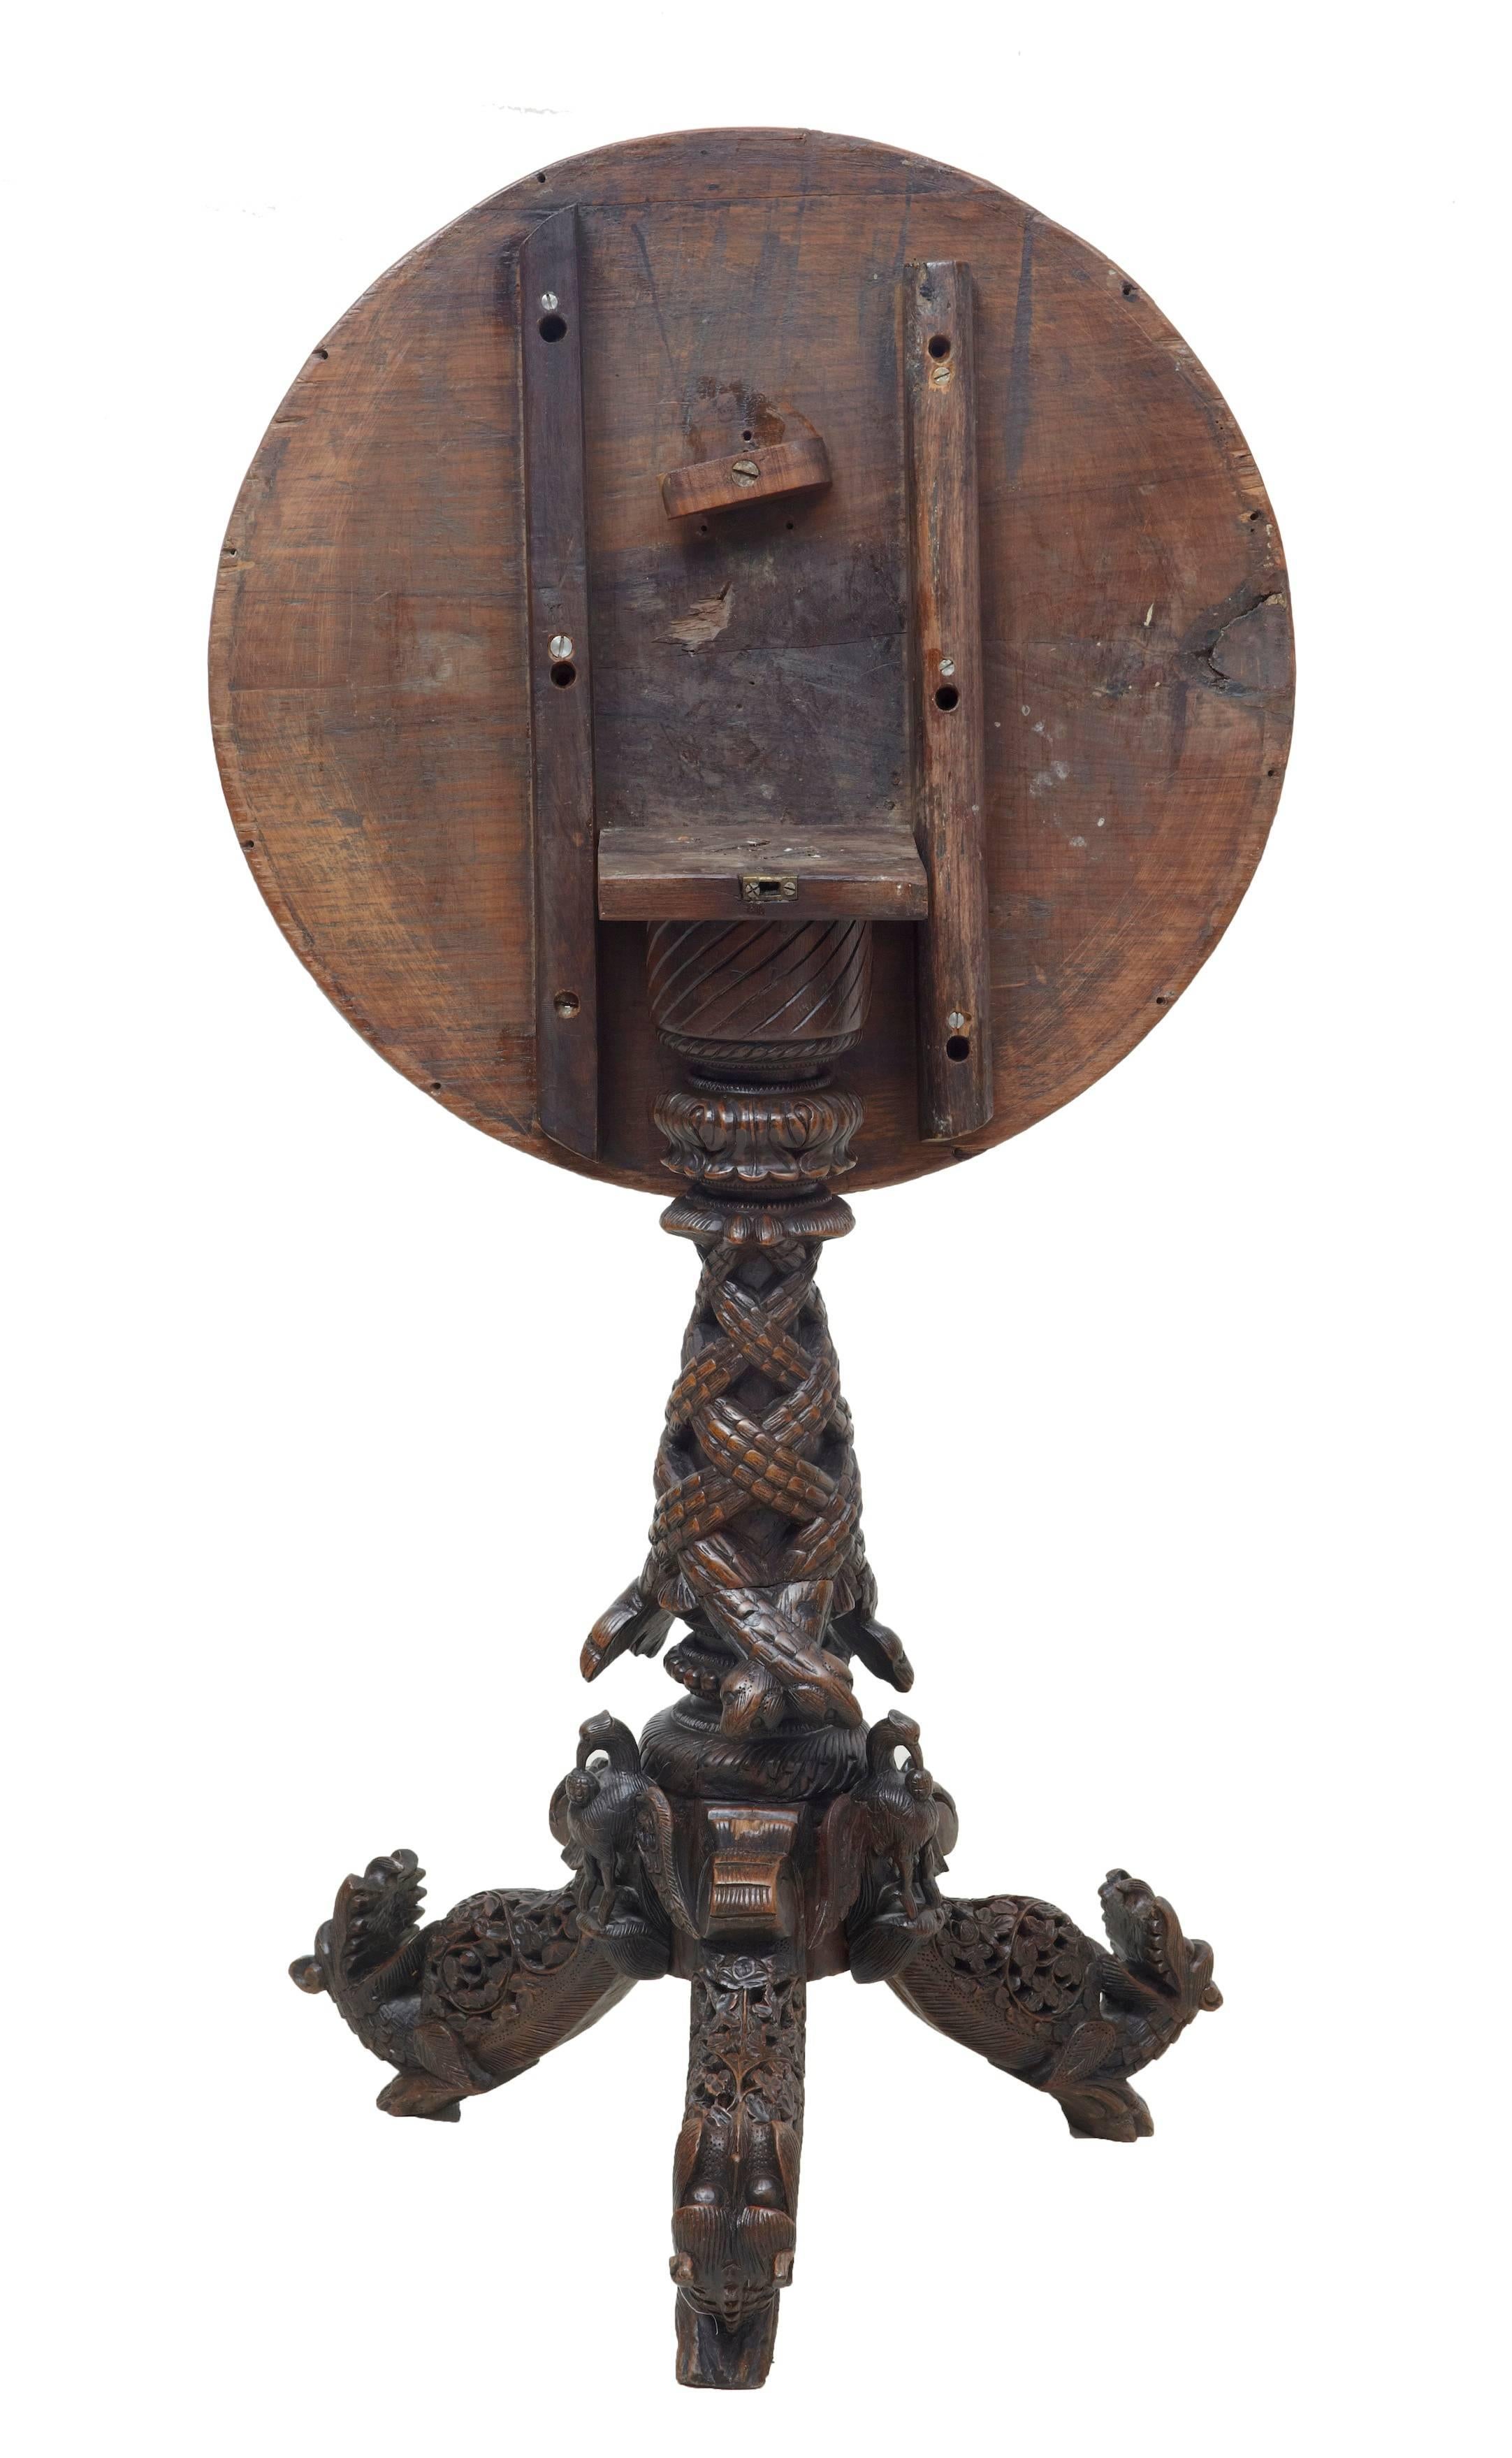 Good quality burmese or Anglo Indian tilt top table, circa 1880.
Carved top with birds, foliage and architecture. Tilt top which leads down to the carved tripod base.
Carved birds and dogs adorn the feet.
Age splits to top which haven't gone all